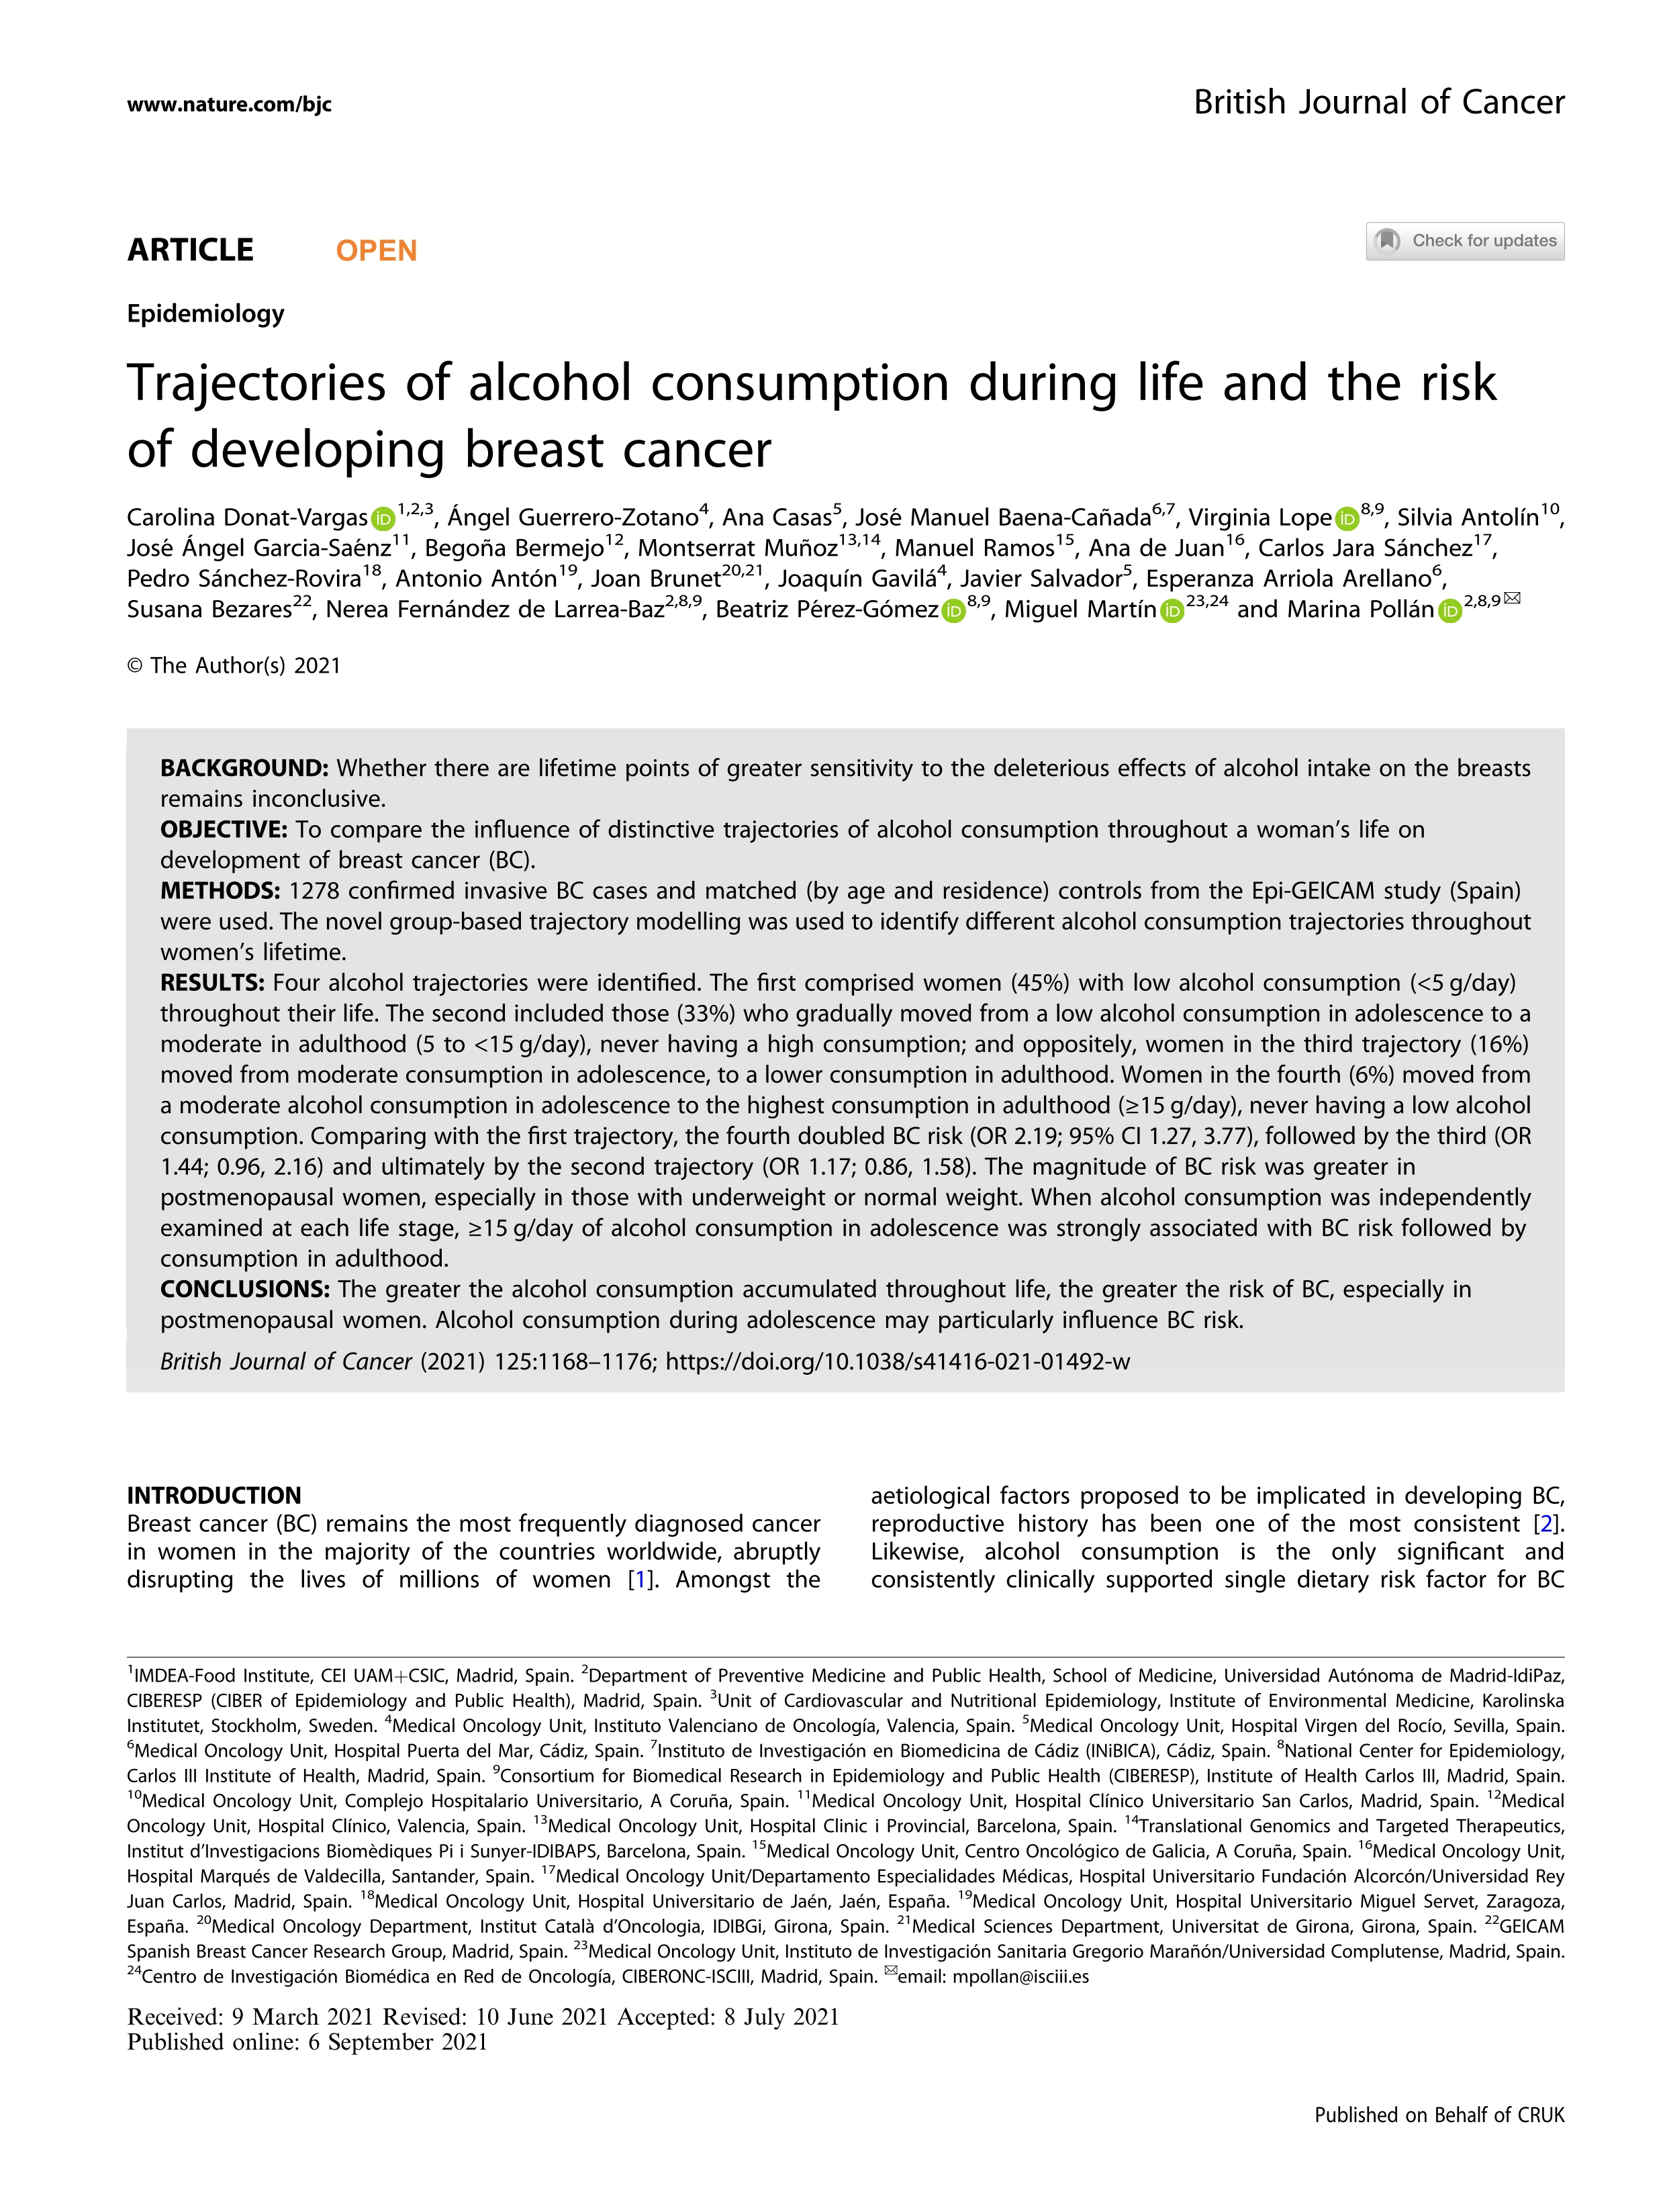 Trajectories of alcohol consumption during life and the risk of developing breast cancer